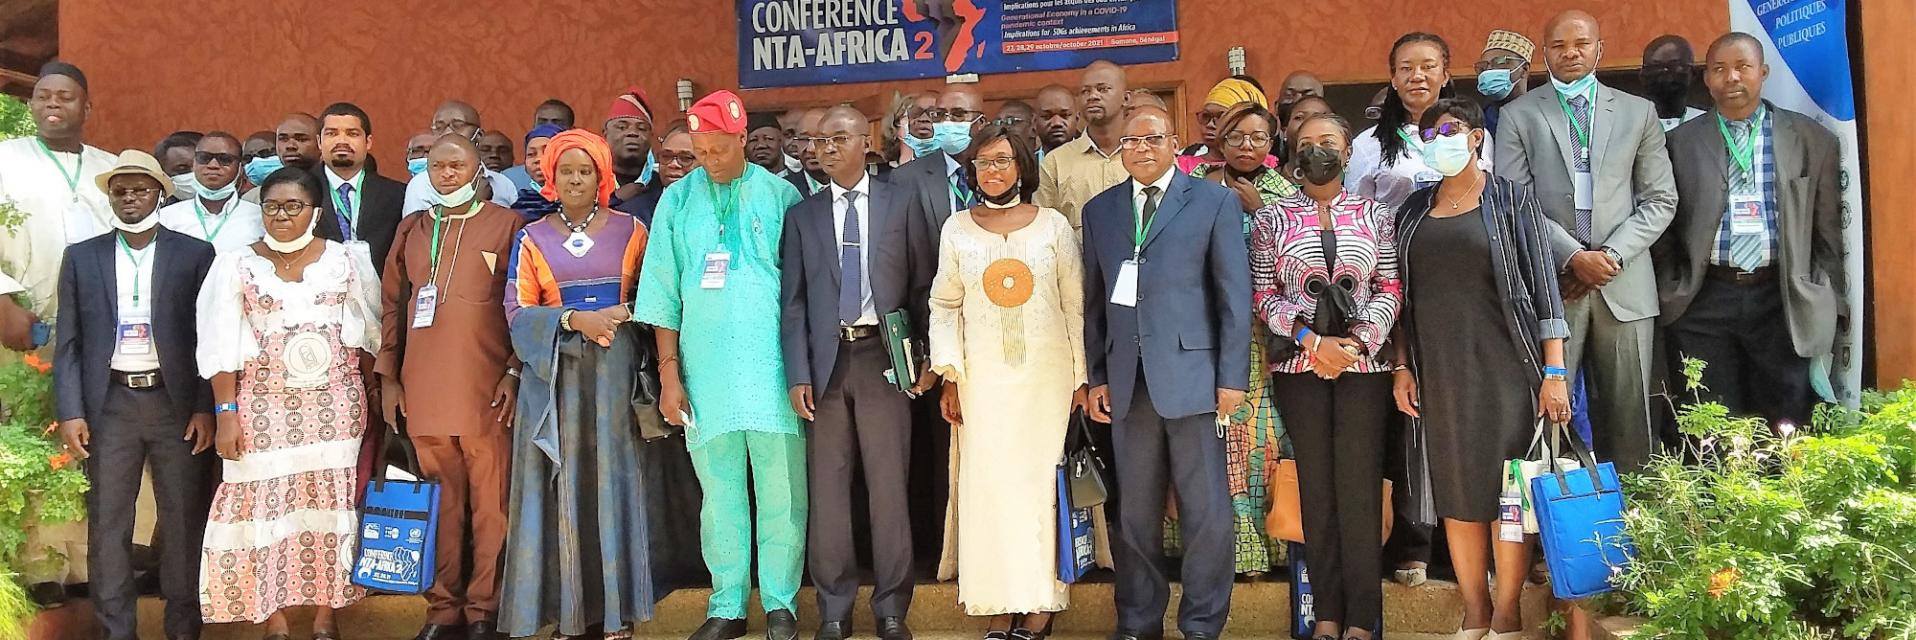 2nd Edition of the NTA Conference: Generational economy in the context of Covid-19 pandemic and the achievement of SDGs in Africa at the heart of the debates